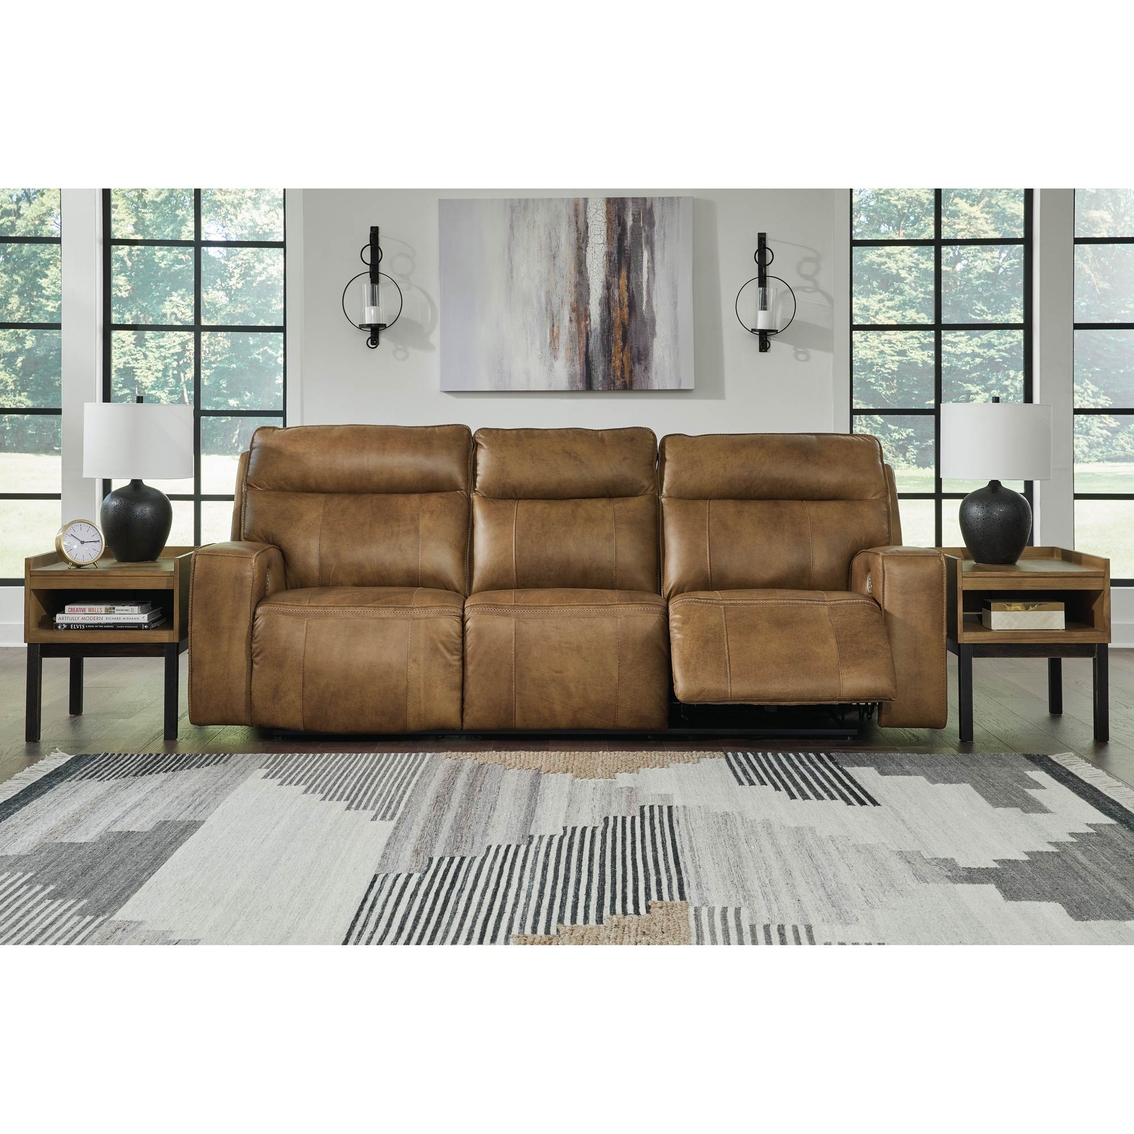 Signature Design by Ashley Game Plan Power Reclining Sofa - Image 5 of 8